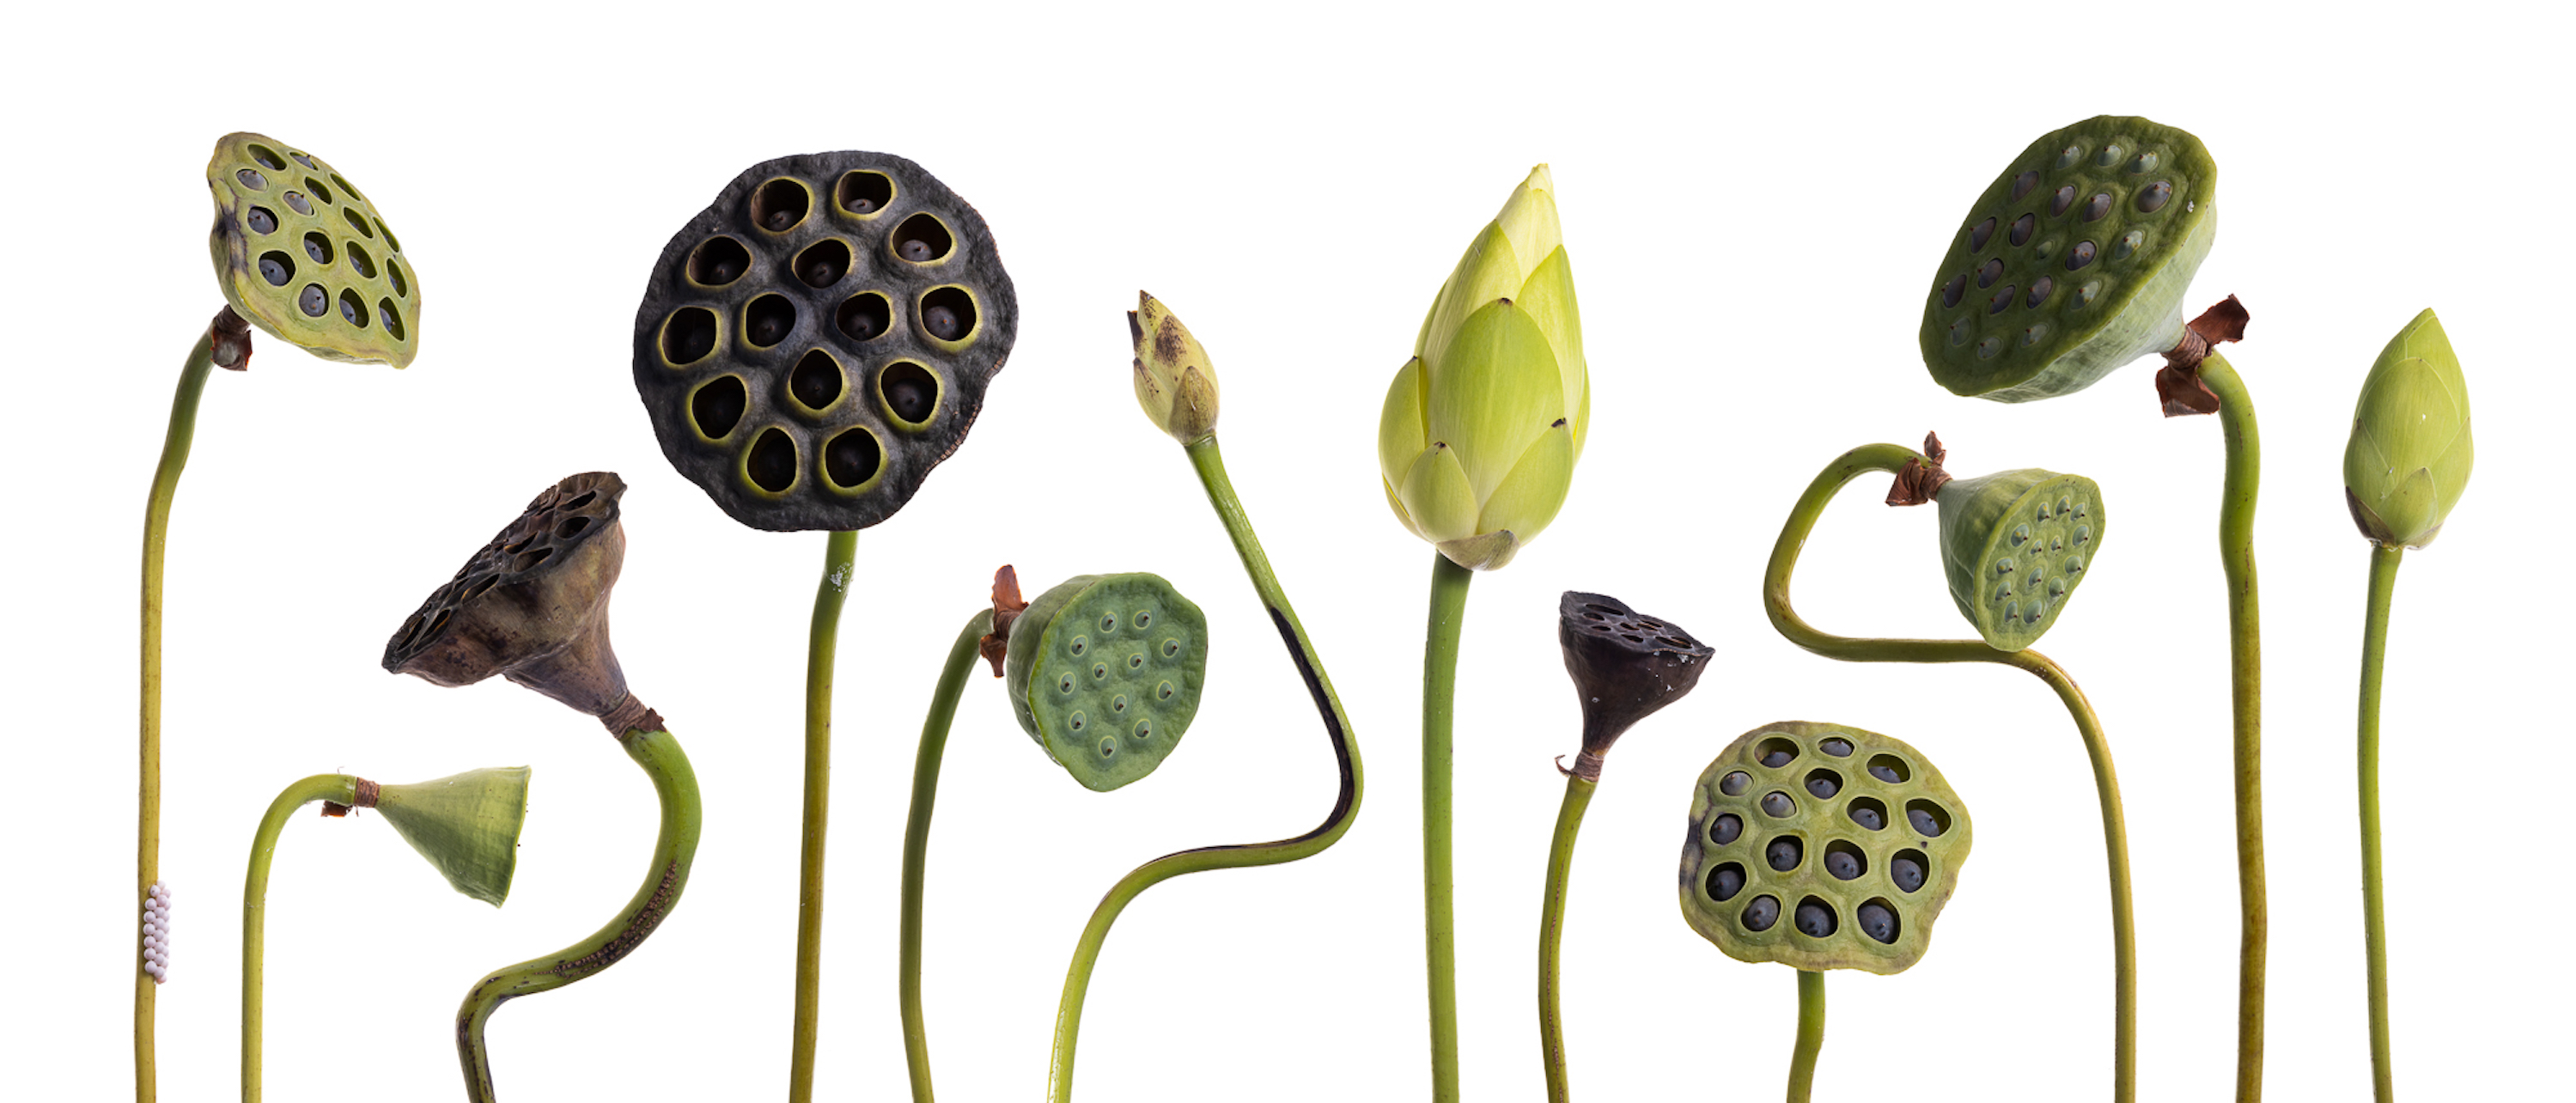 A portrait of American lotus seed pods and stems